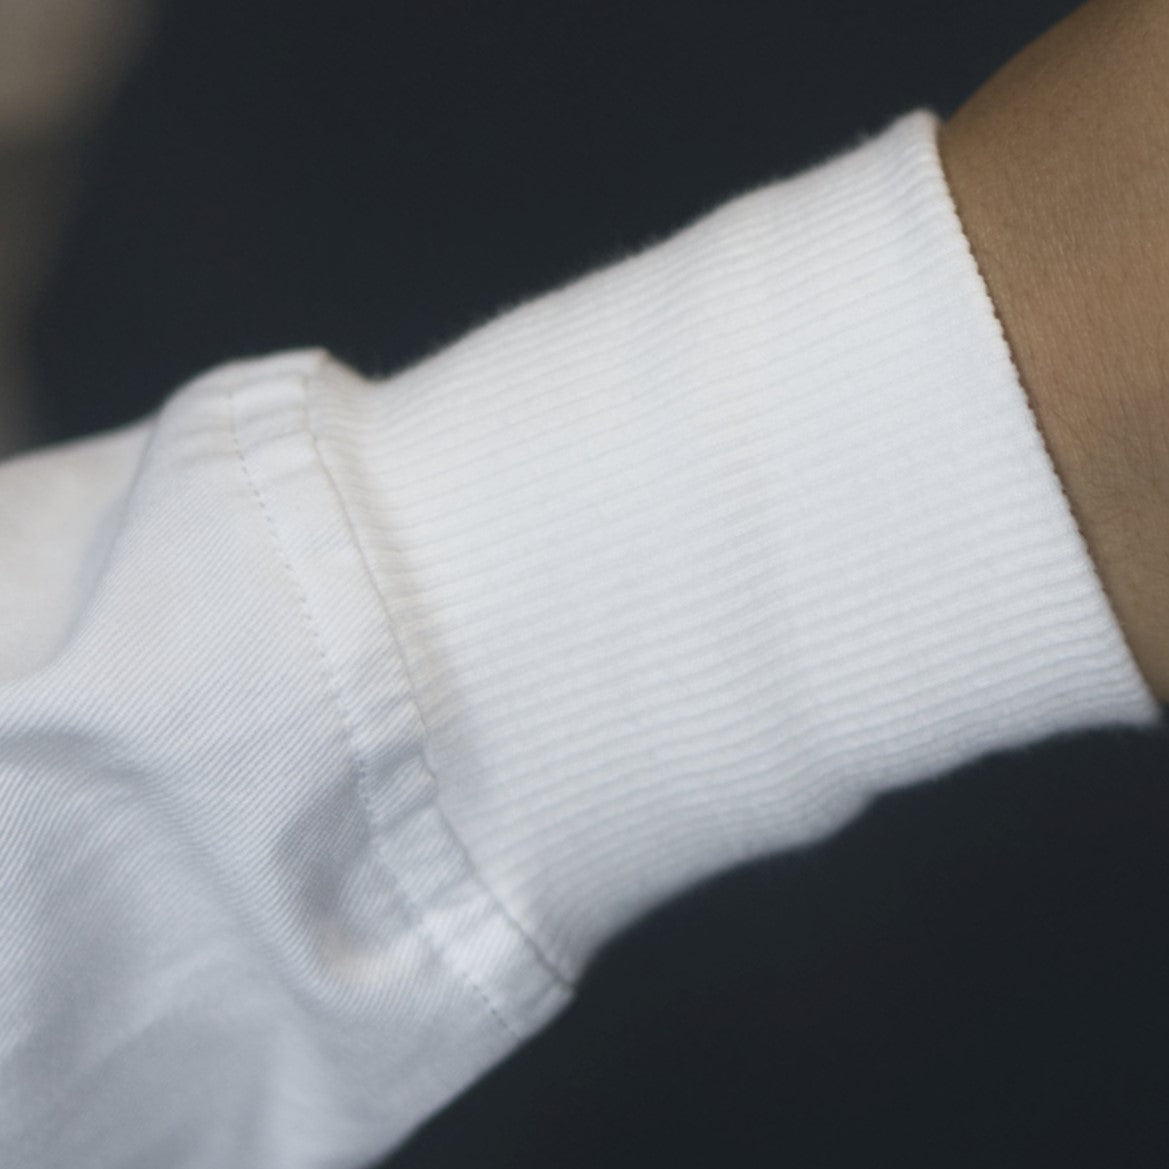 Lab Coats with Knit Cuffs vs. Open Cuffs (What's best for scientists?) -  Genius Lab Gear